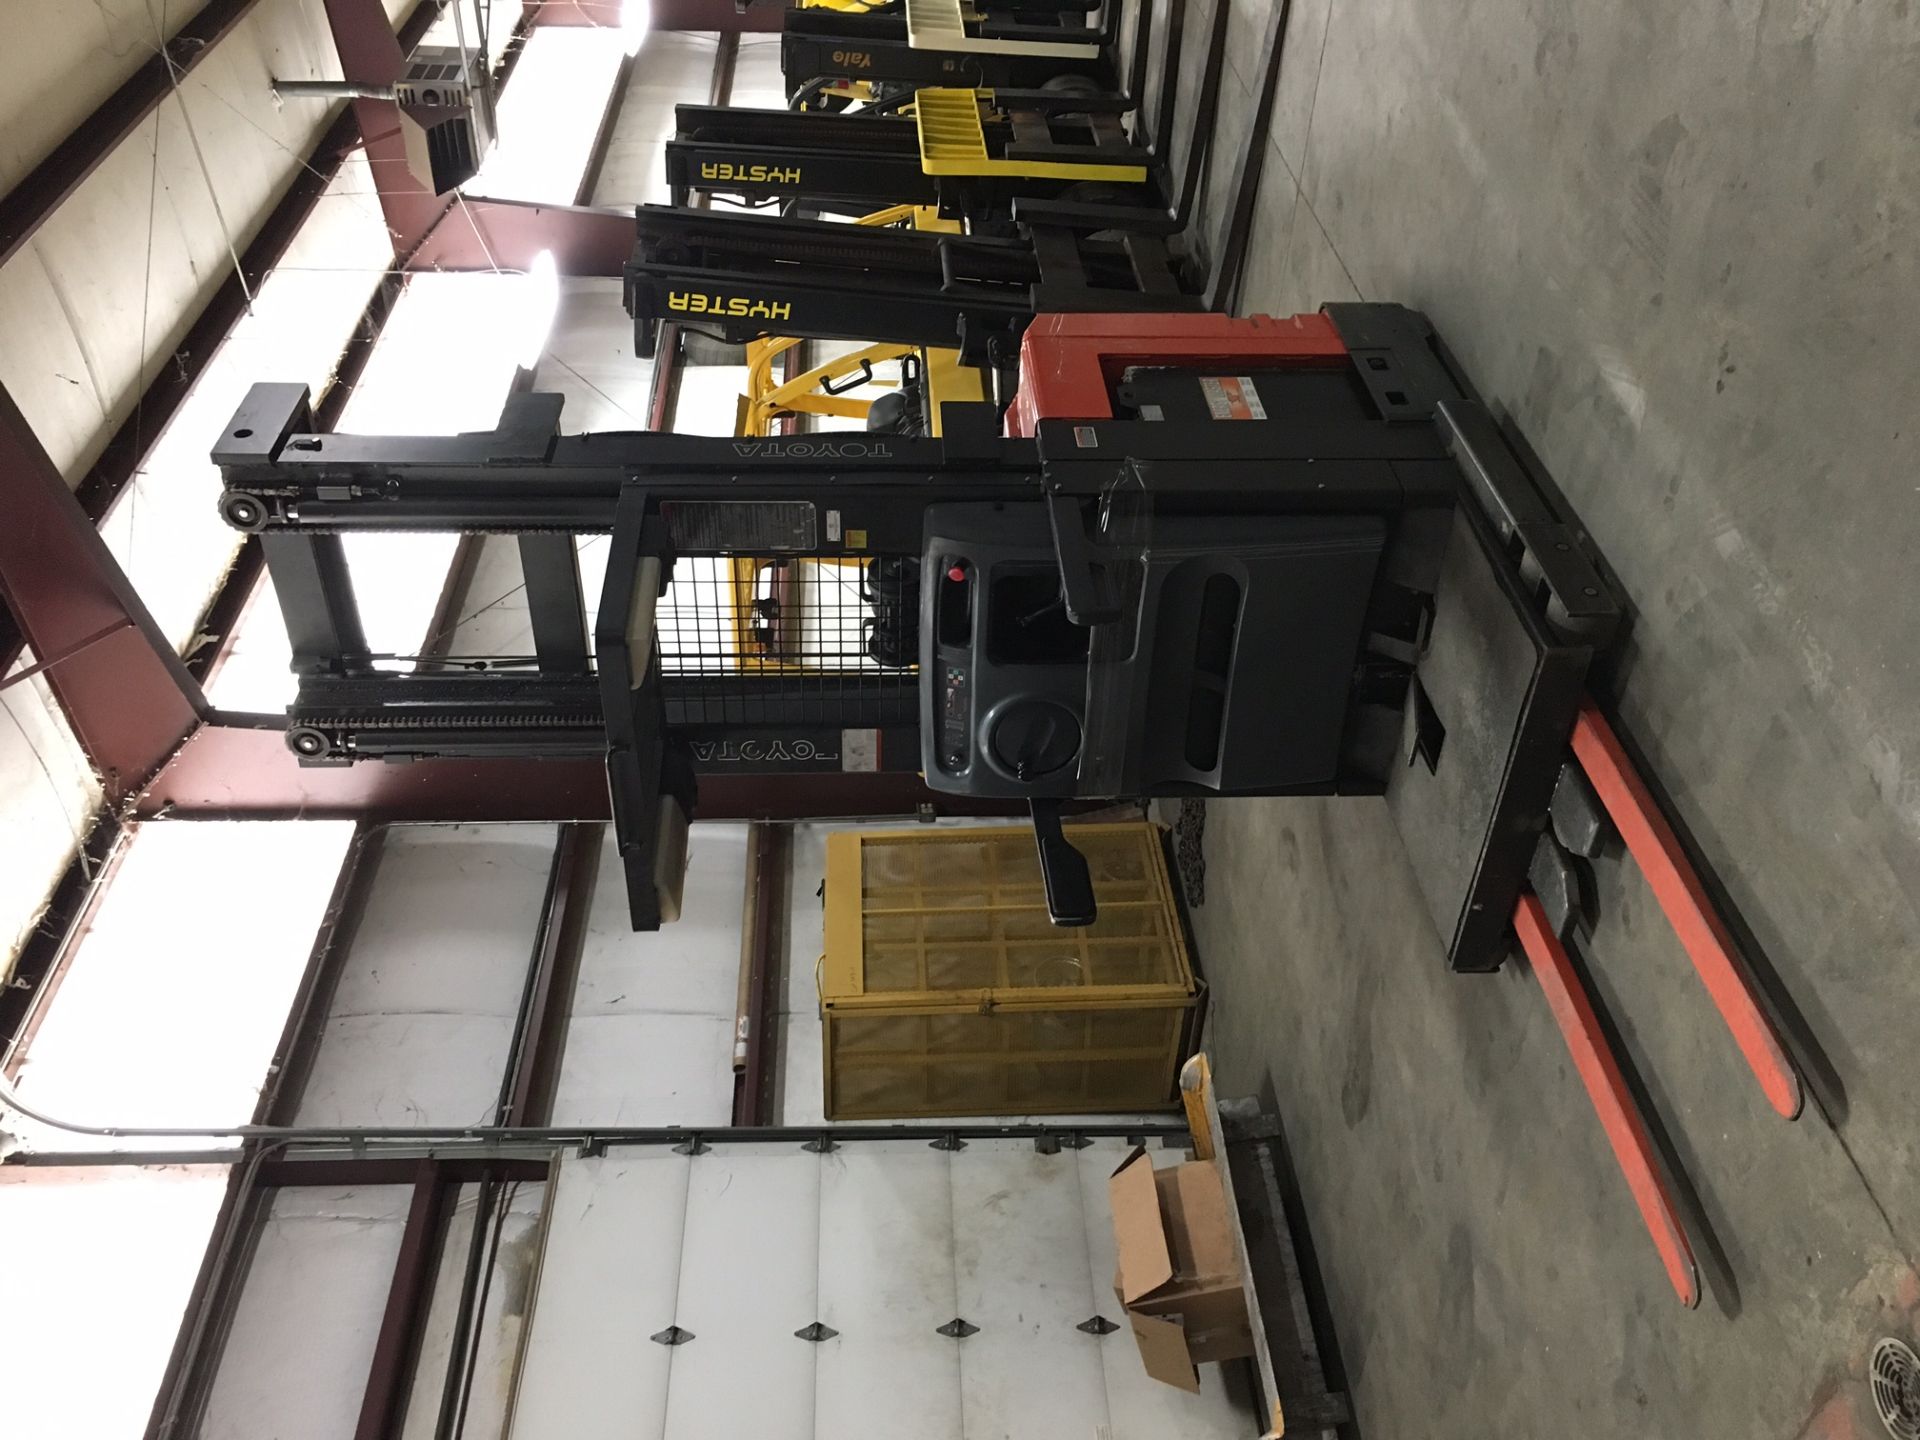 2011 TOYOTA 3,000 LB ORDER PICKER, MOD: 6BPU15, WITH 24-VOLT BATTERY, 300" RAISED, 1,231 DRIVE HOURS - Image 2 of 5